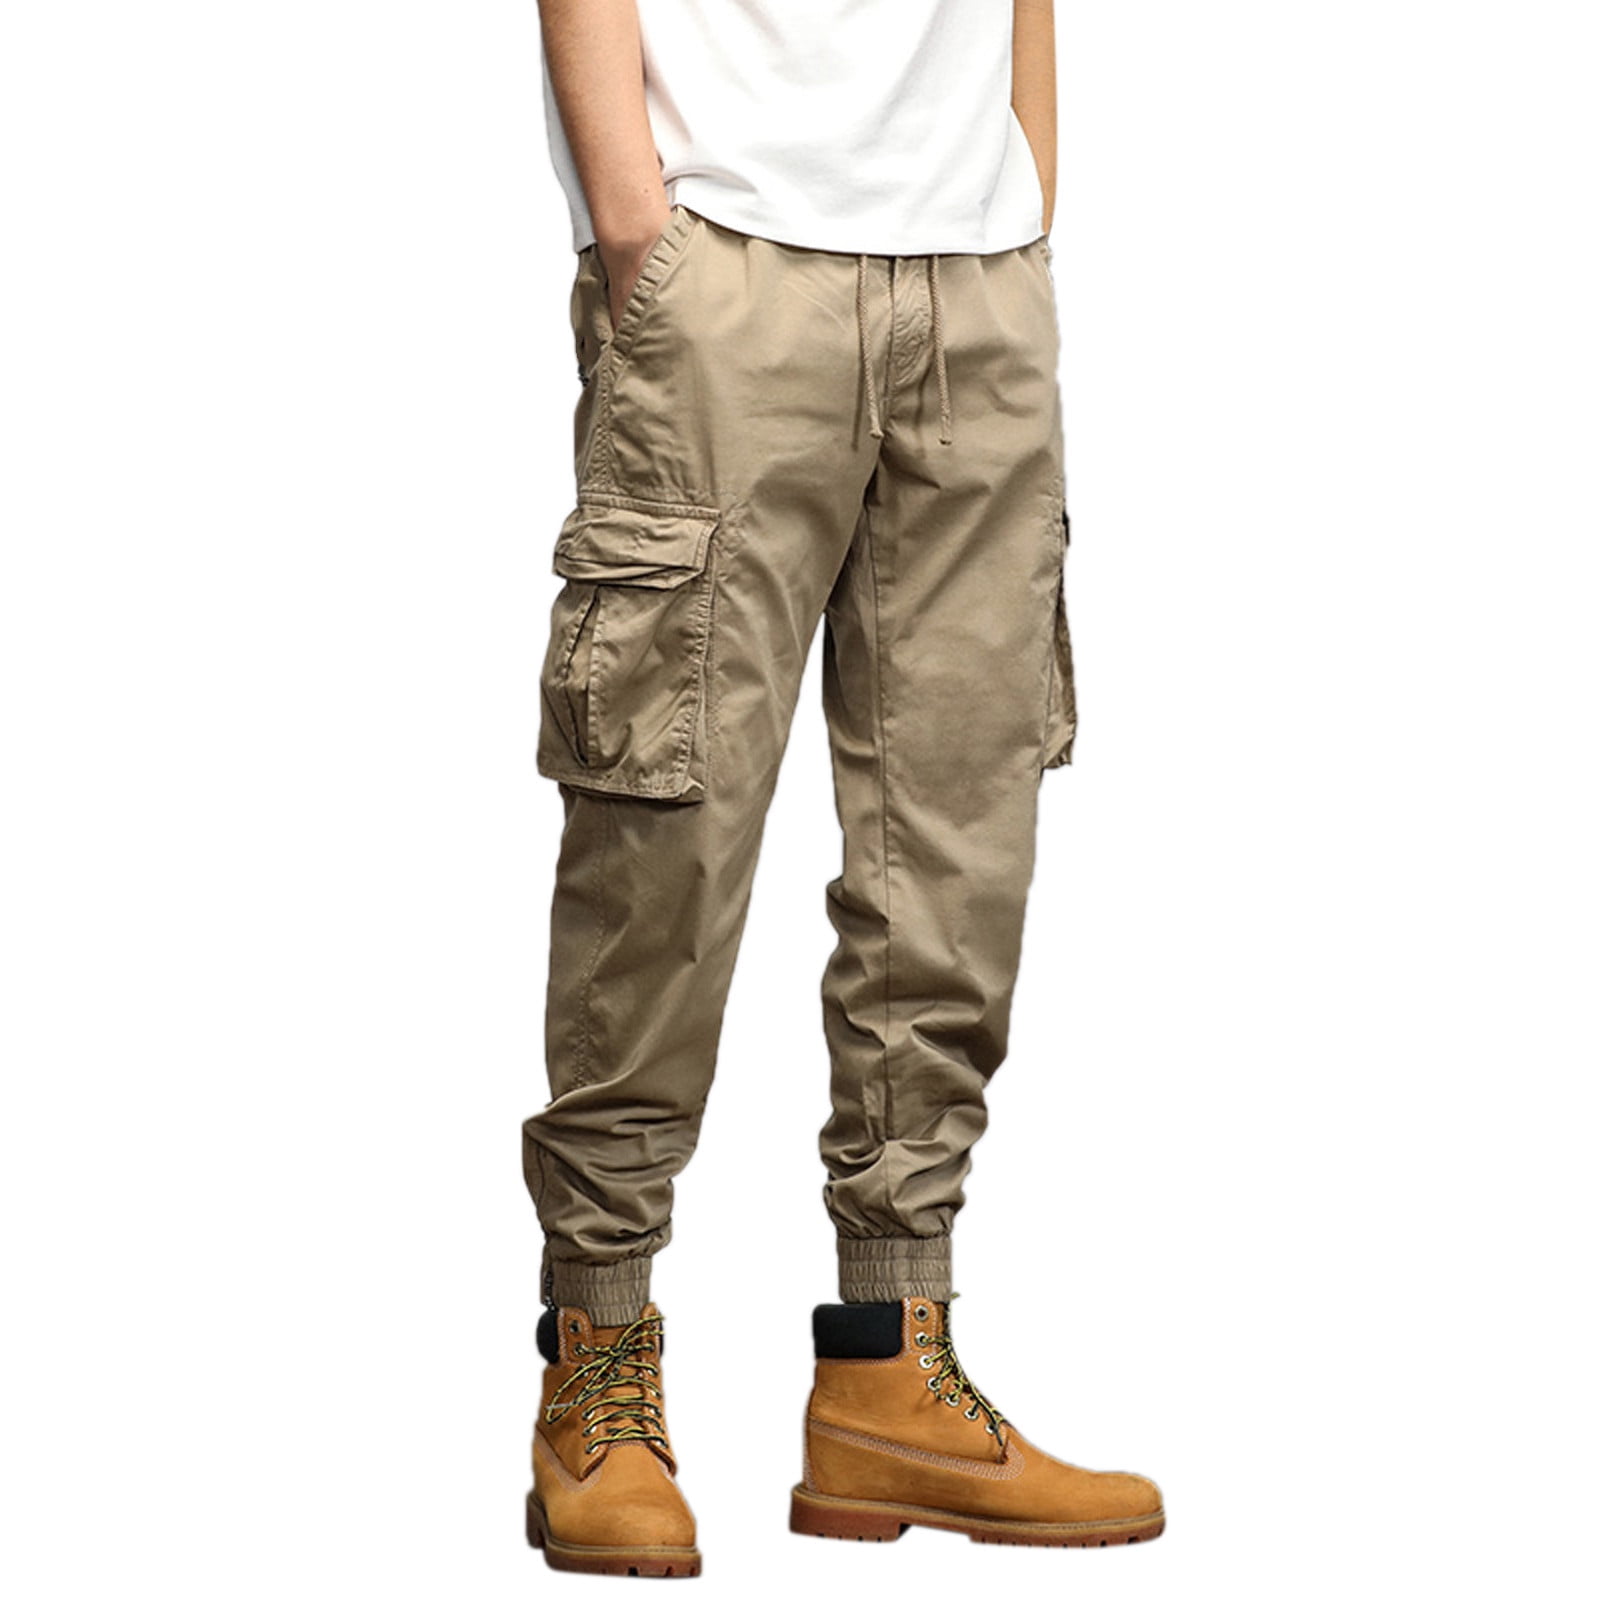 Boys Cargo Pant For Kids - Torby